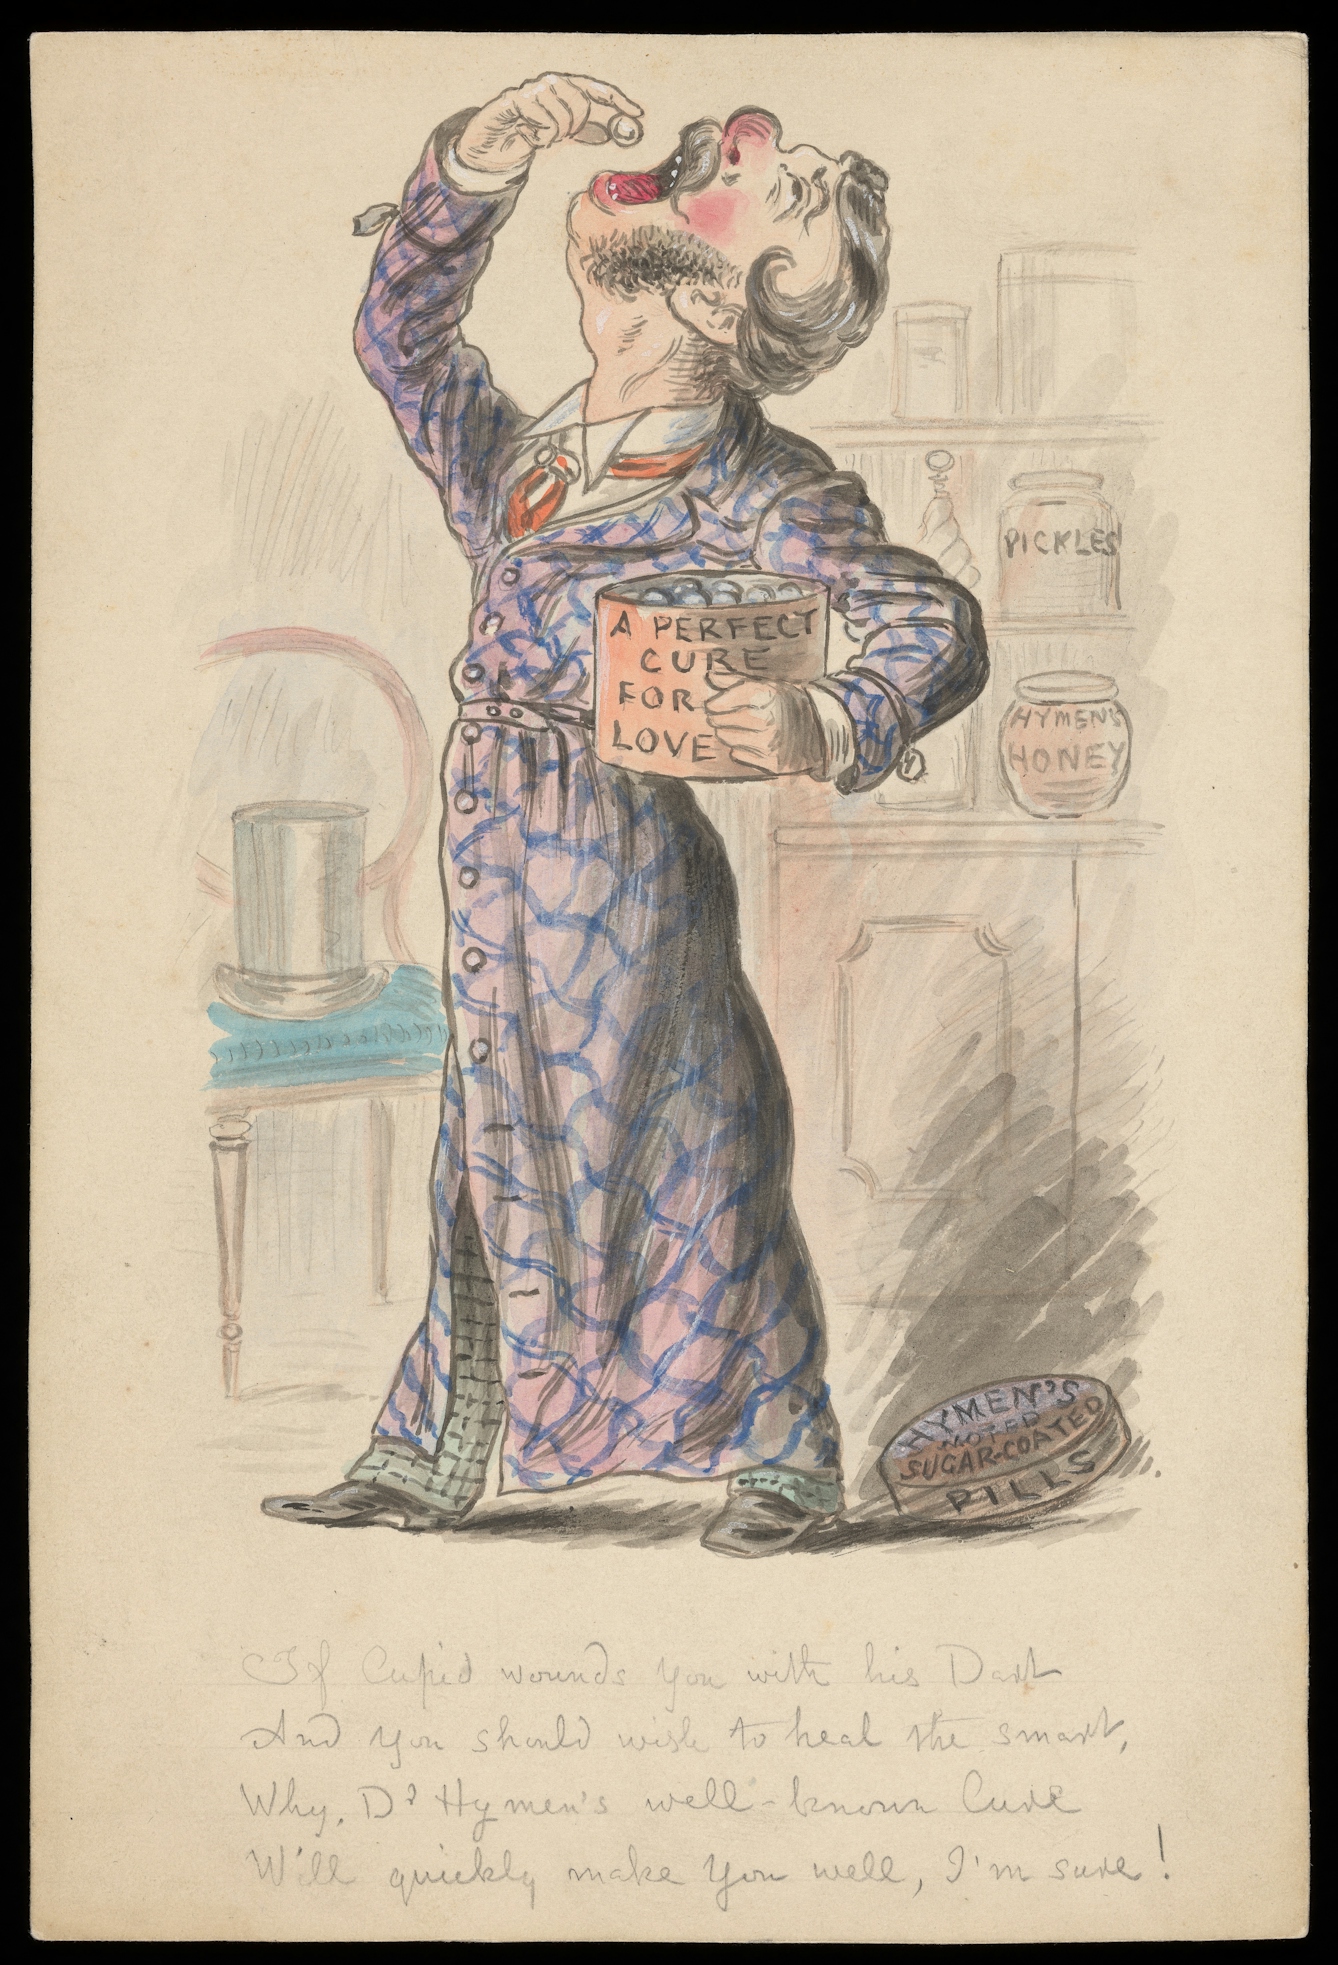 Watercolour showing a man holding a tub of pills labelled "A perfect cure for love". On the floor is the lid for the tub labelled "Hymen's sugar coated pills" and underneath is a poem in pencil. 